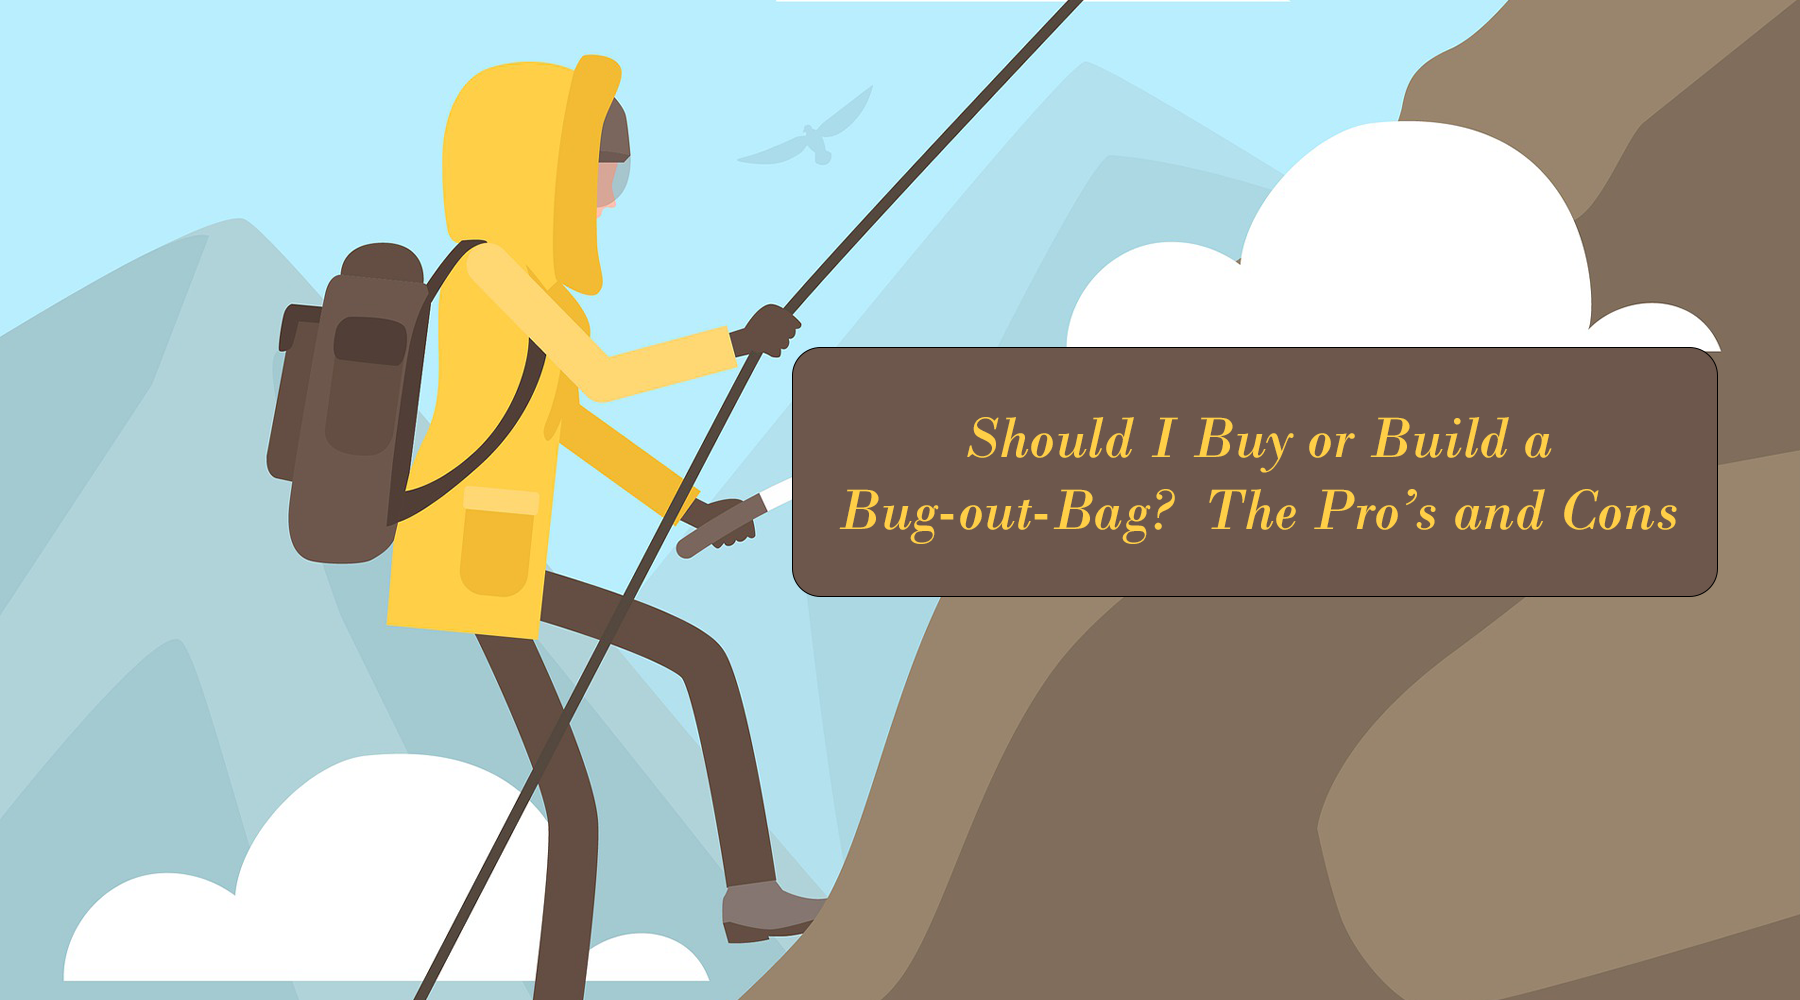 Should I Buy or Build a Bug Out Bag? The Pros and Cons